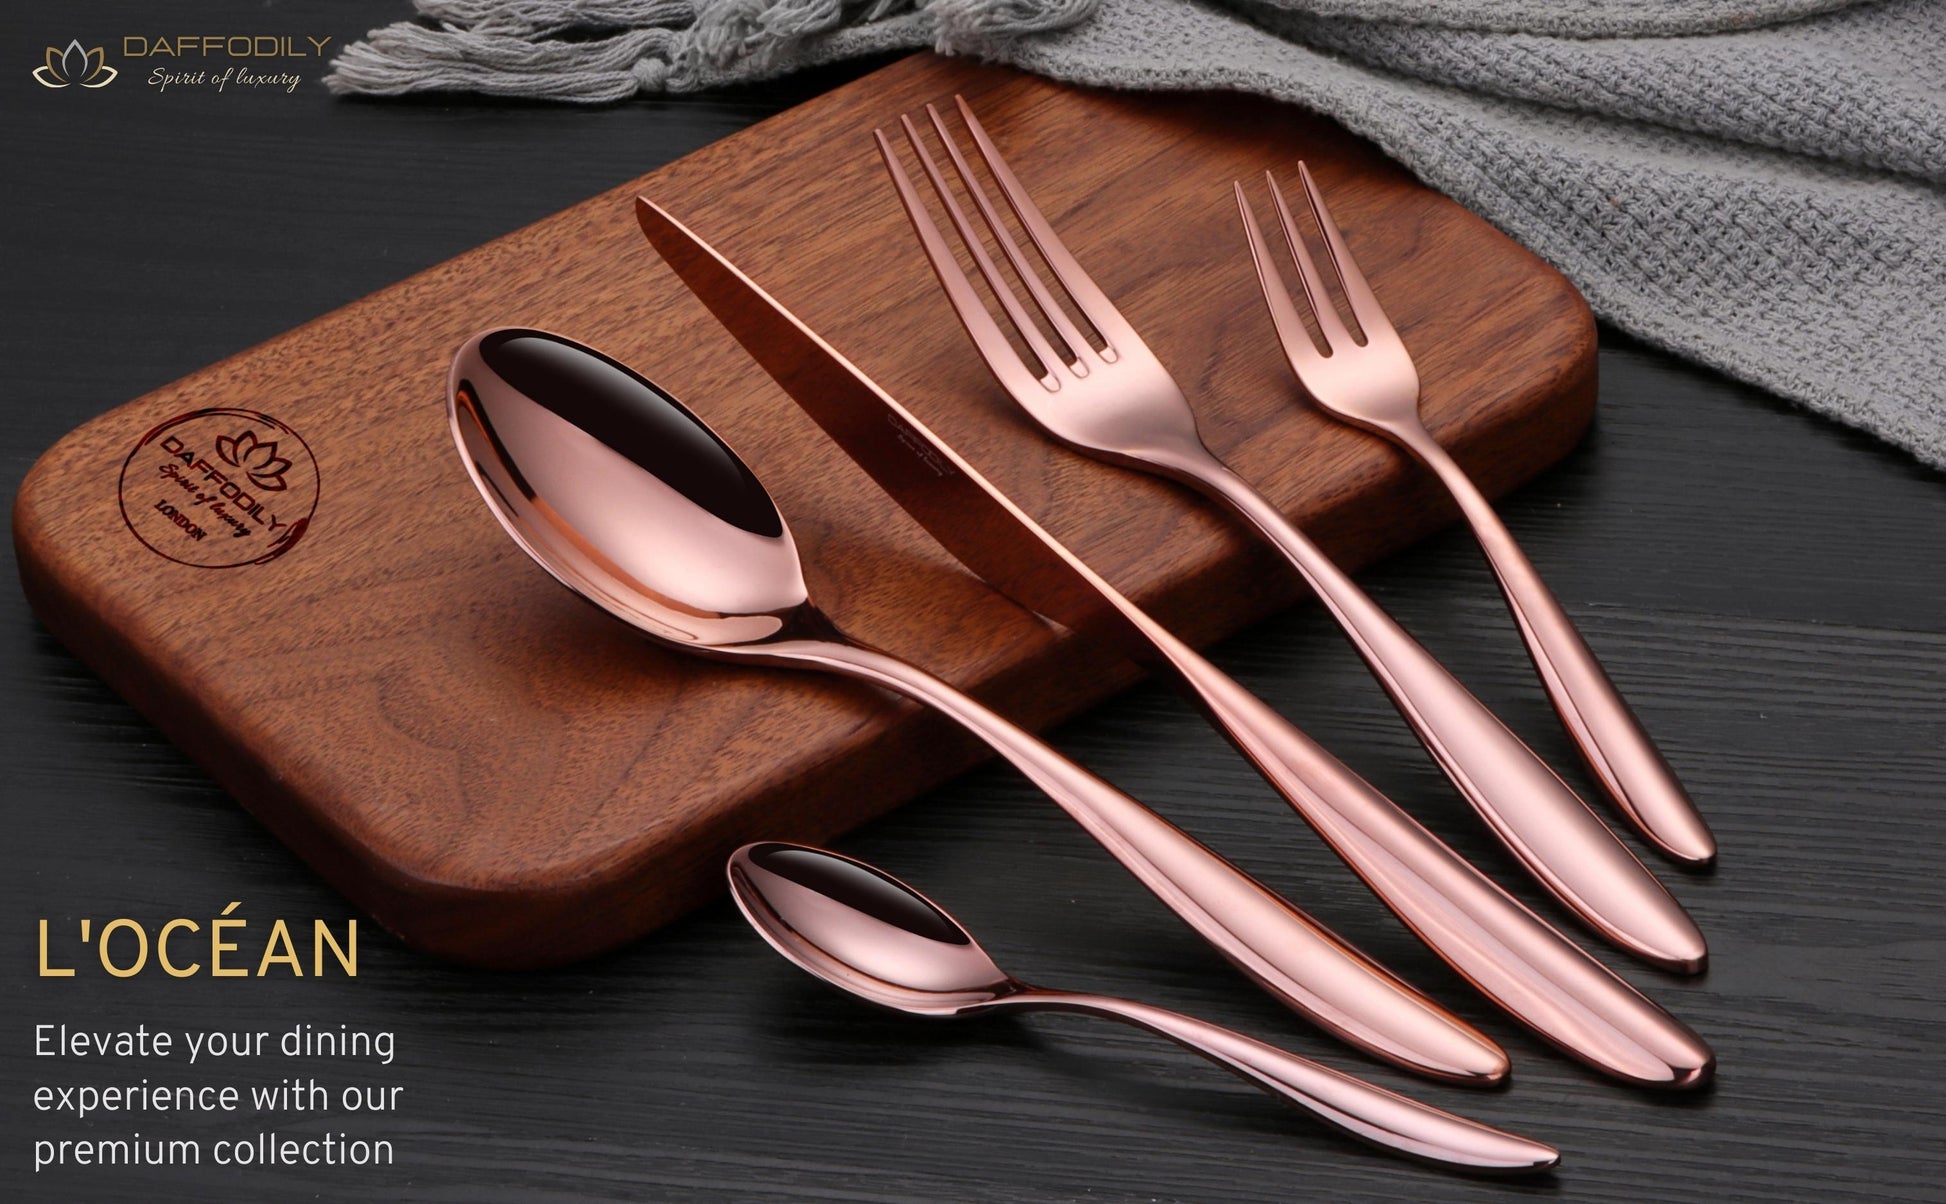 Romantic rose gold flatware for special occasions